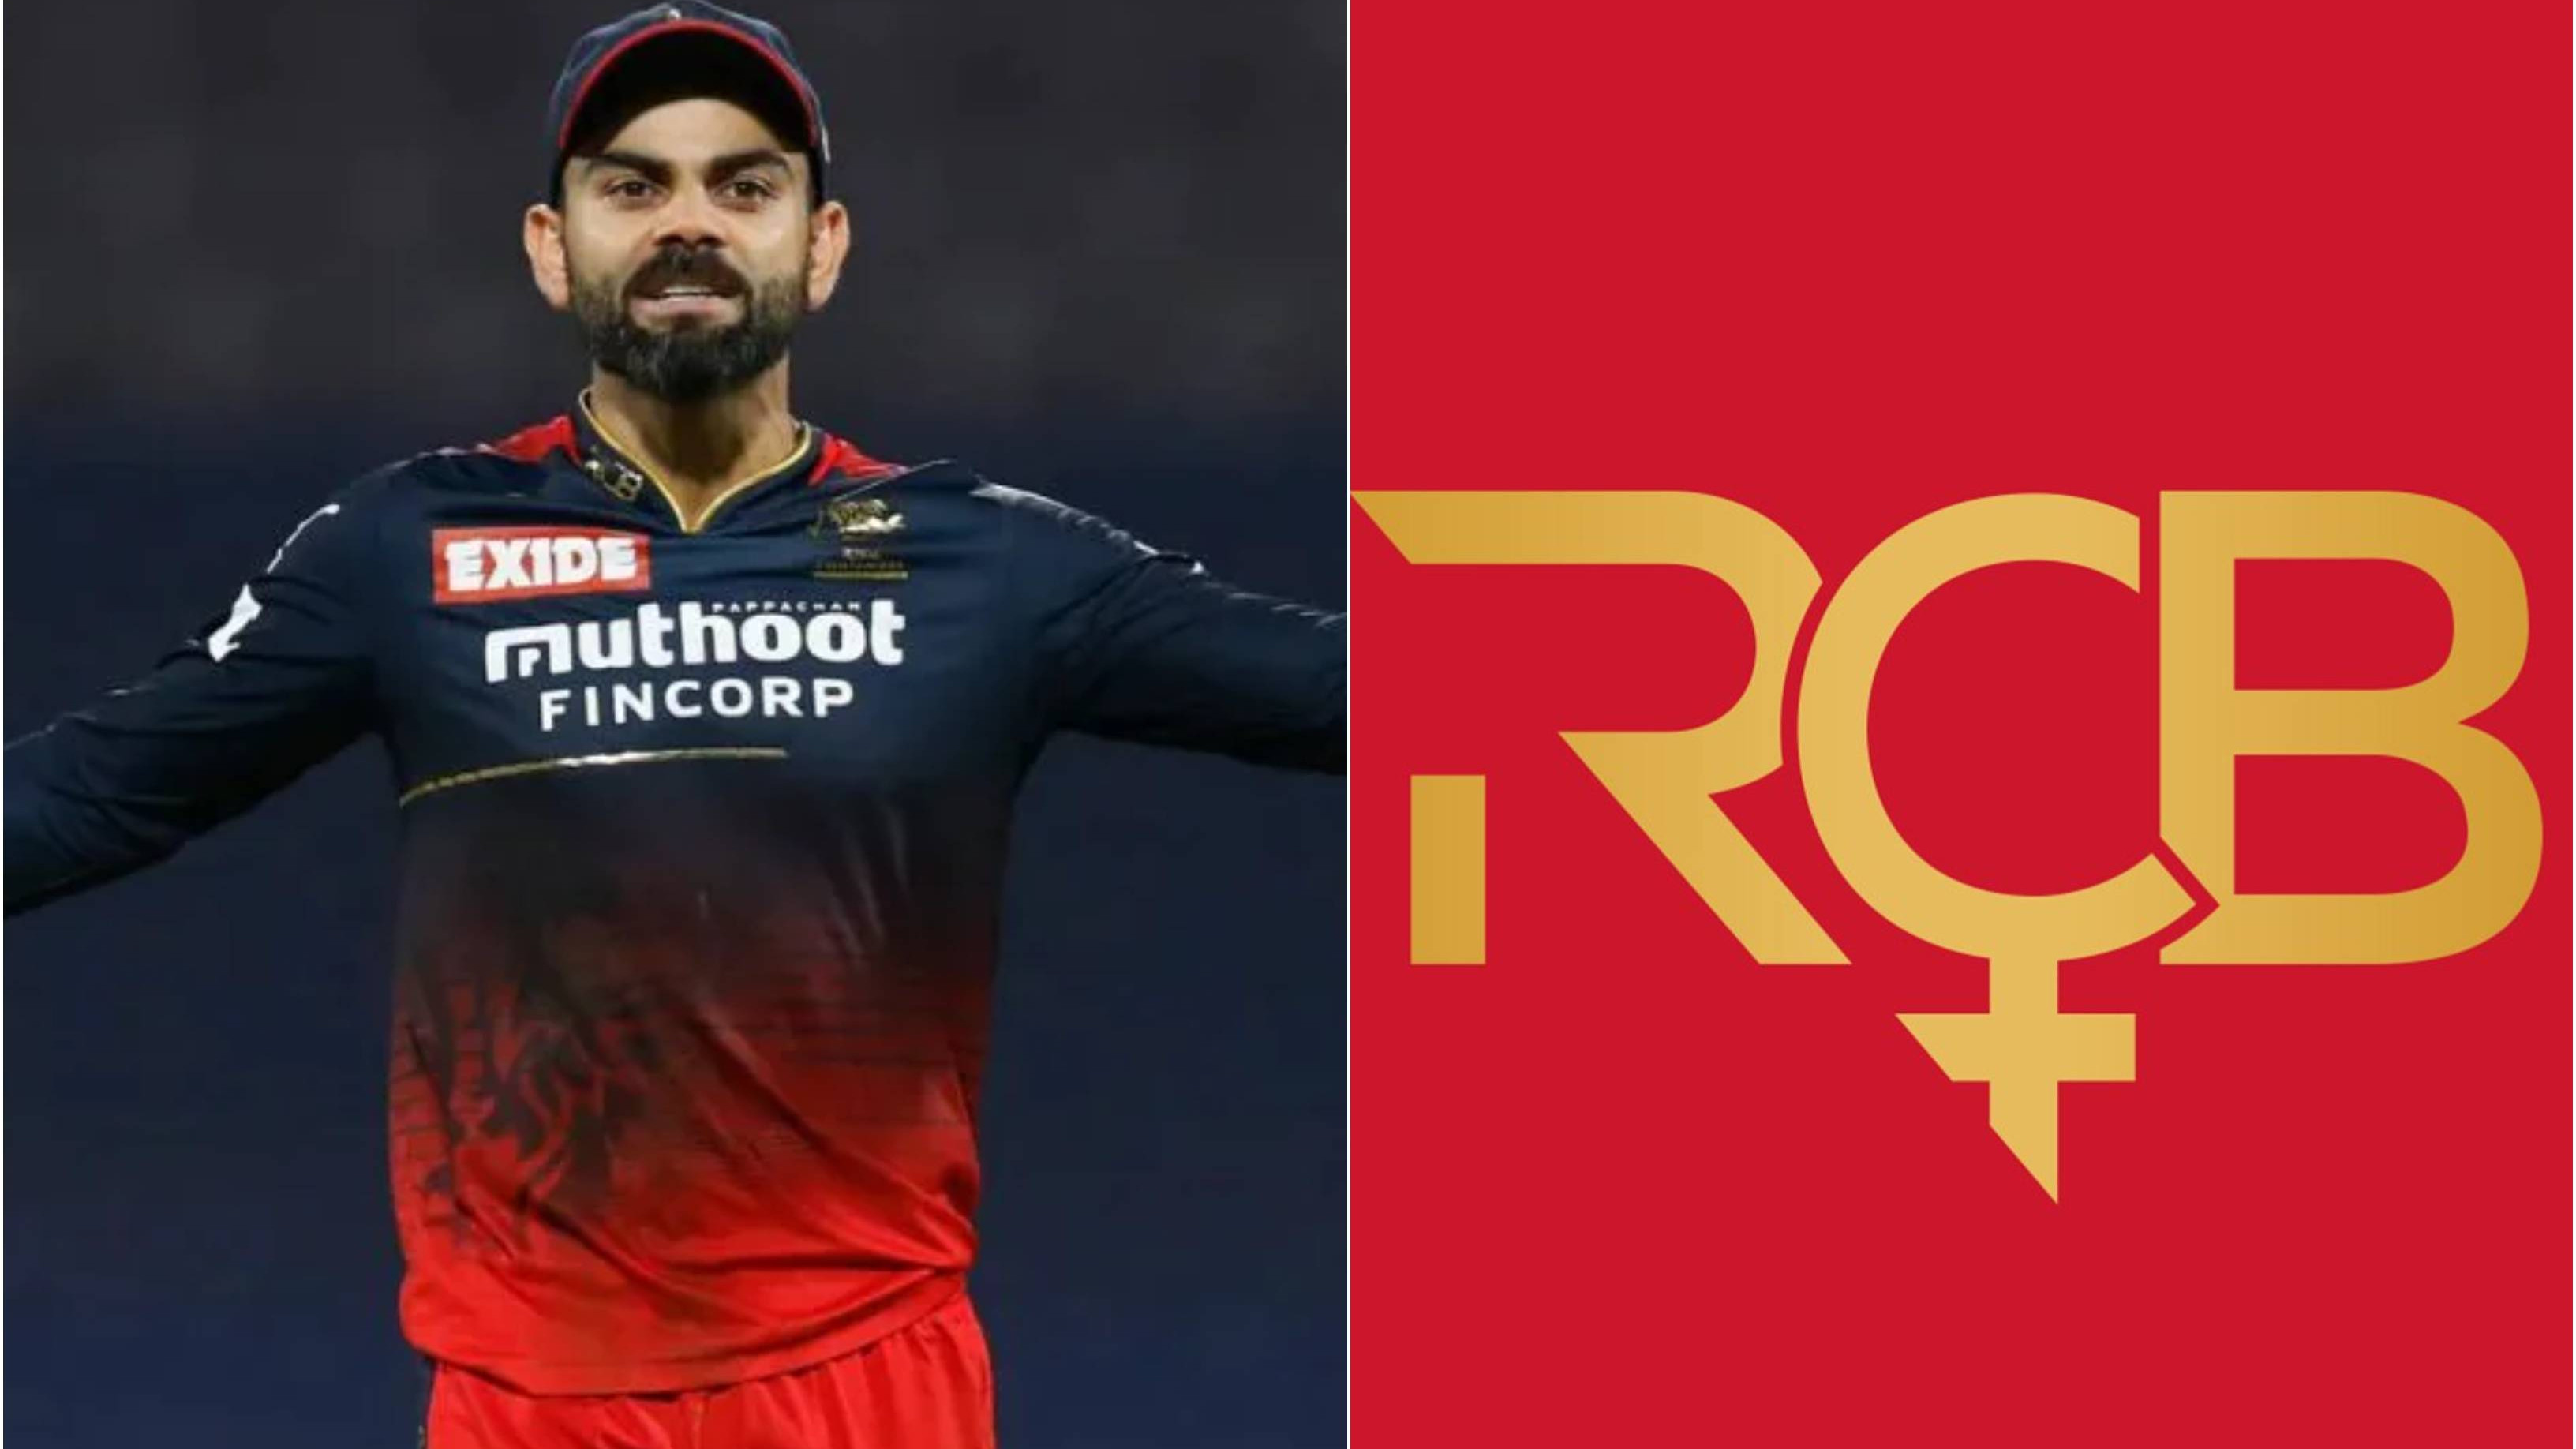 “Can’t wait to cheer for our women,” says Virat Kohli after RCB win bid for Women's Premier League